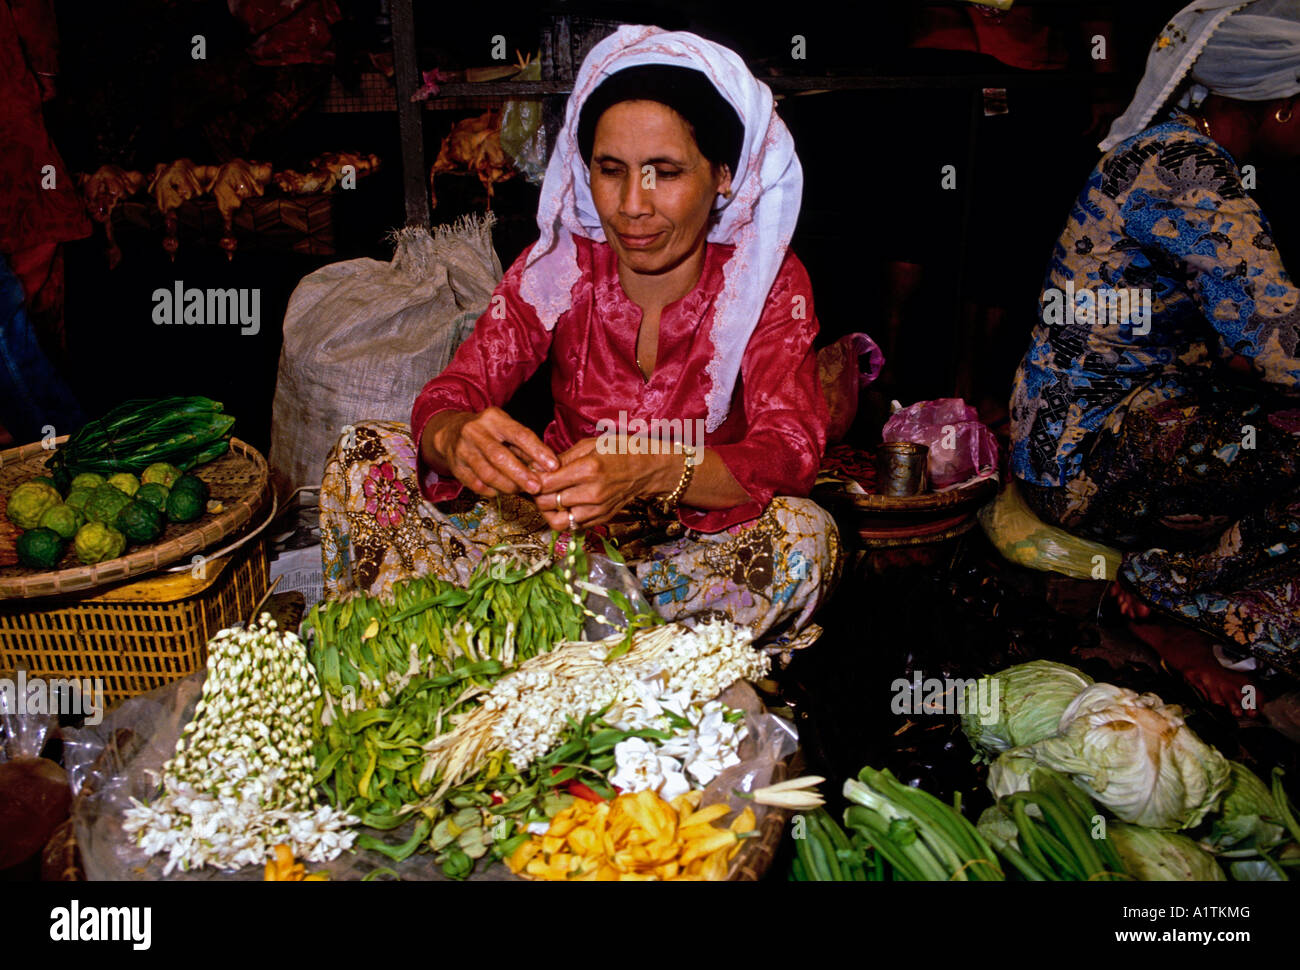 Malay woman, food vendor, seller, selling, fruits, vegetables, central